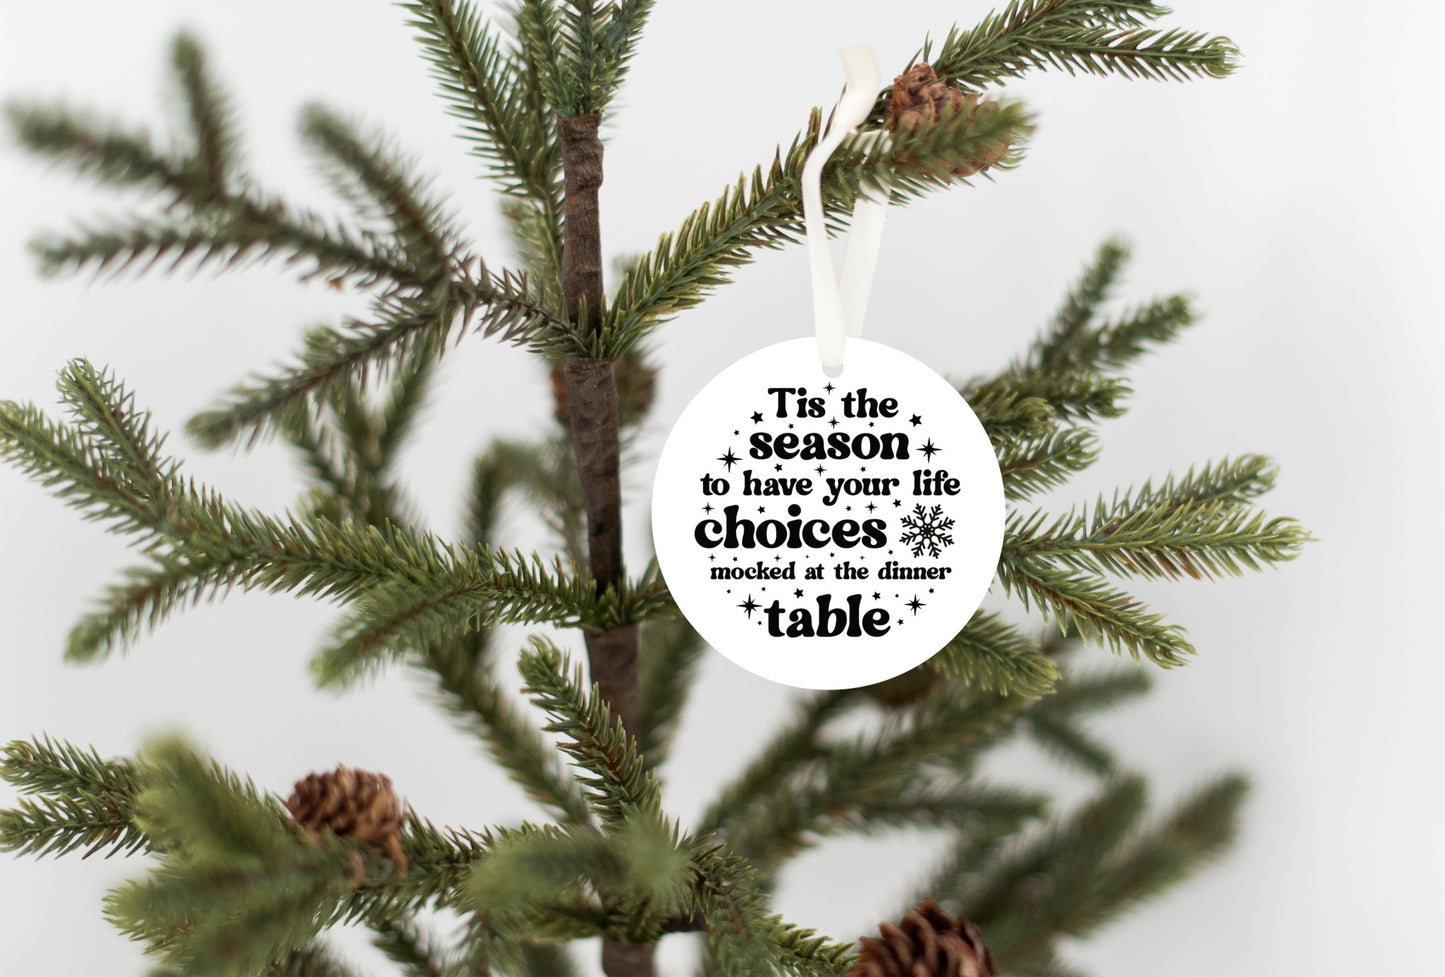 Tis the season to have your choices mocked Christmas Ornament